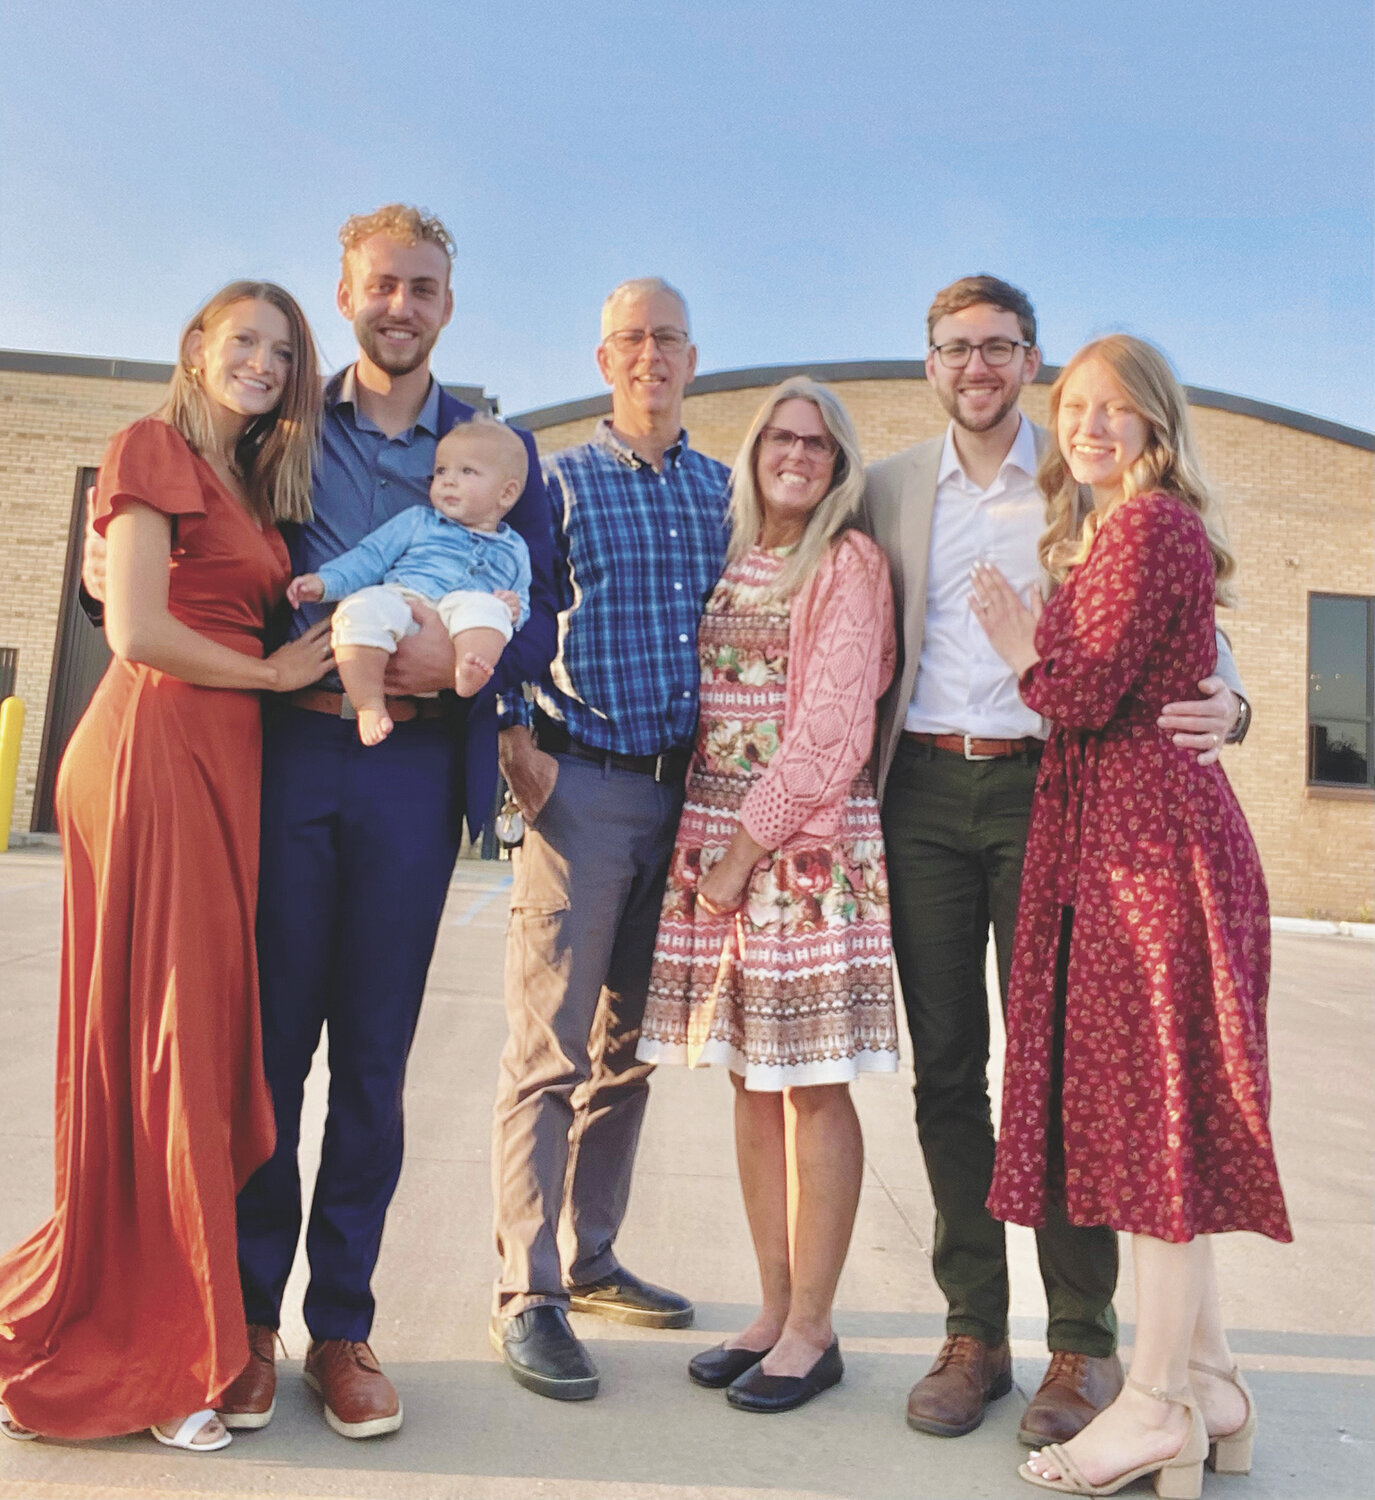 The Mindeman family — Sydney (from left) and her husband Durant, holding their son Alister, Trent and Dawn, and Daryle and his wife Angele — operates BittyBean on Main Street in Bismarck, North Dakota. The coffee and culinary location opened the week before Thanksgiving in 2015.